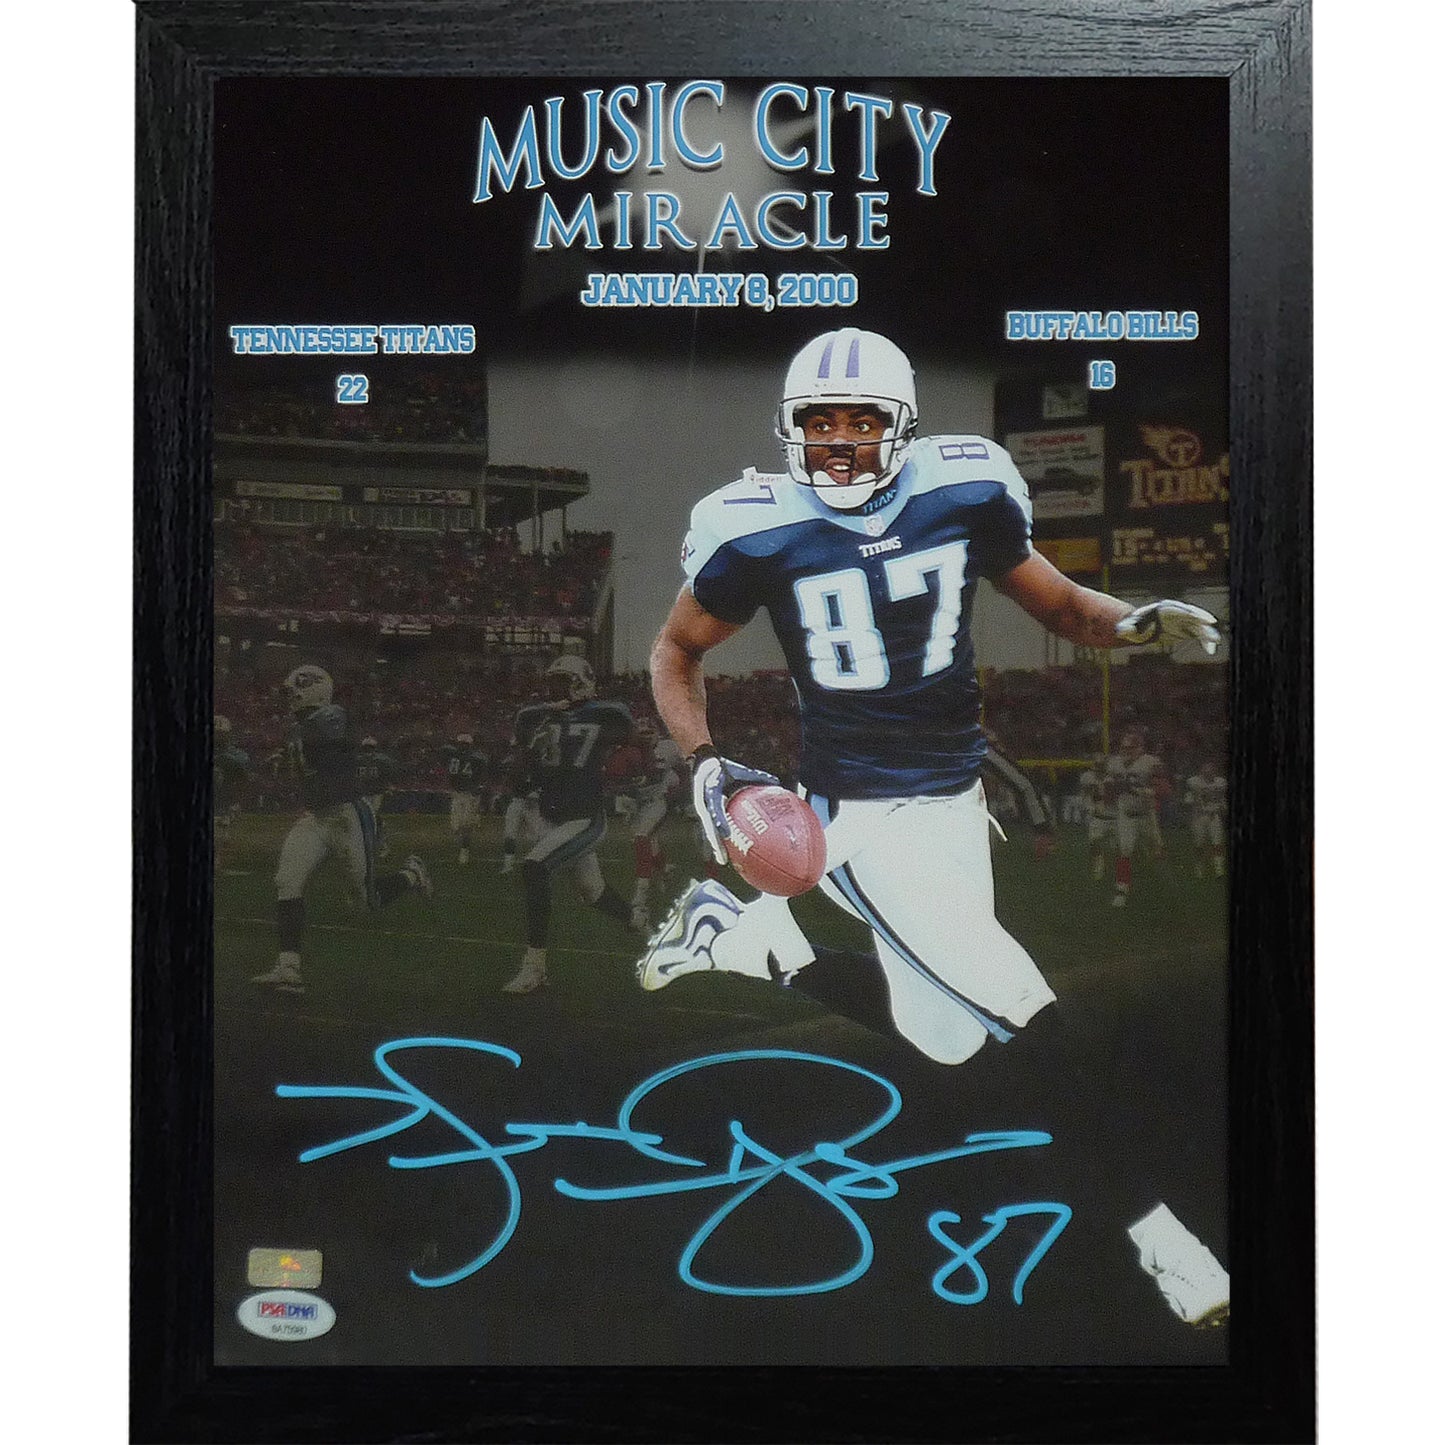 Kevin Dyson Autographed Tennessee Titans (Music City Miracle Collage) Framed 11x14 Photo - JSA